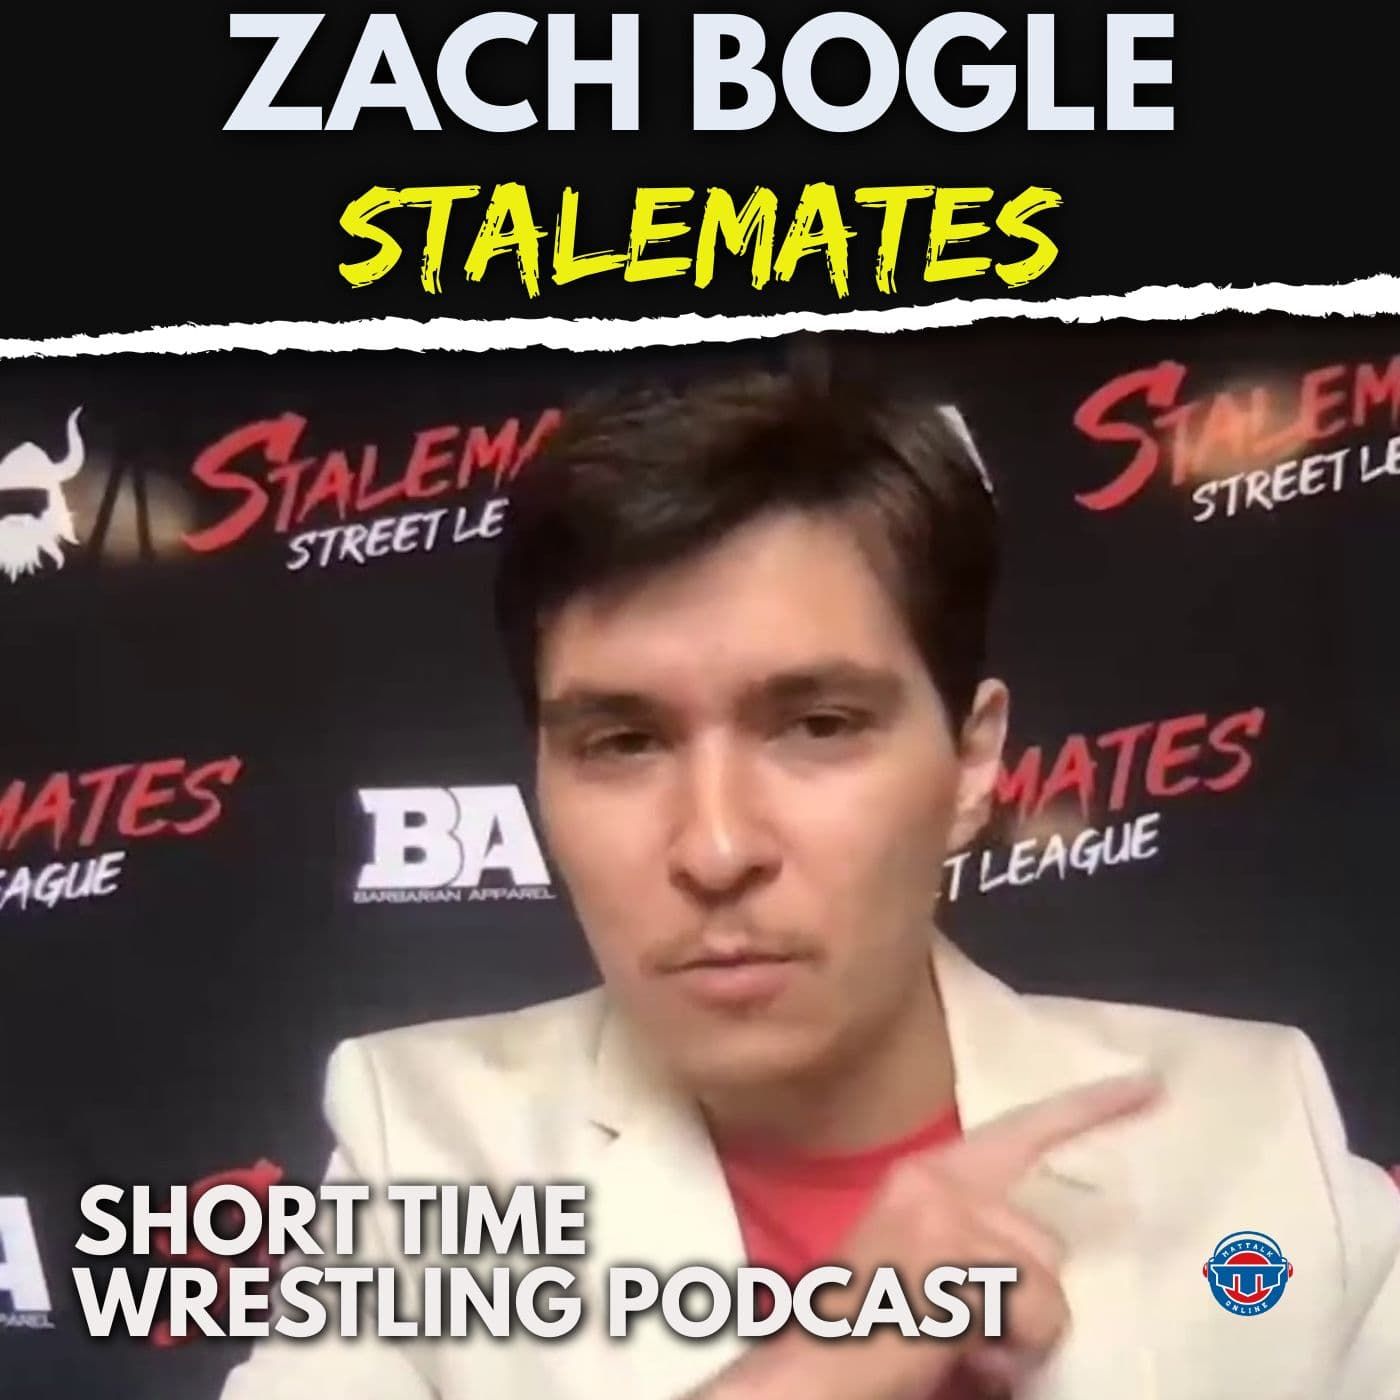 Sipping some of that wrestling internet tea with Stalemates founder Zach Bogle